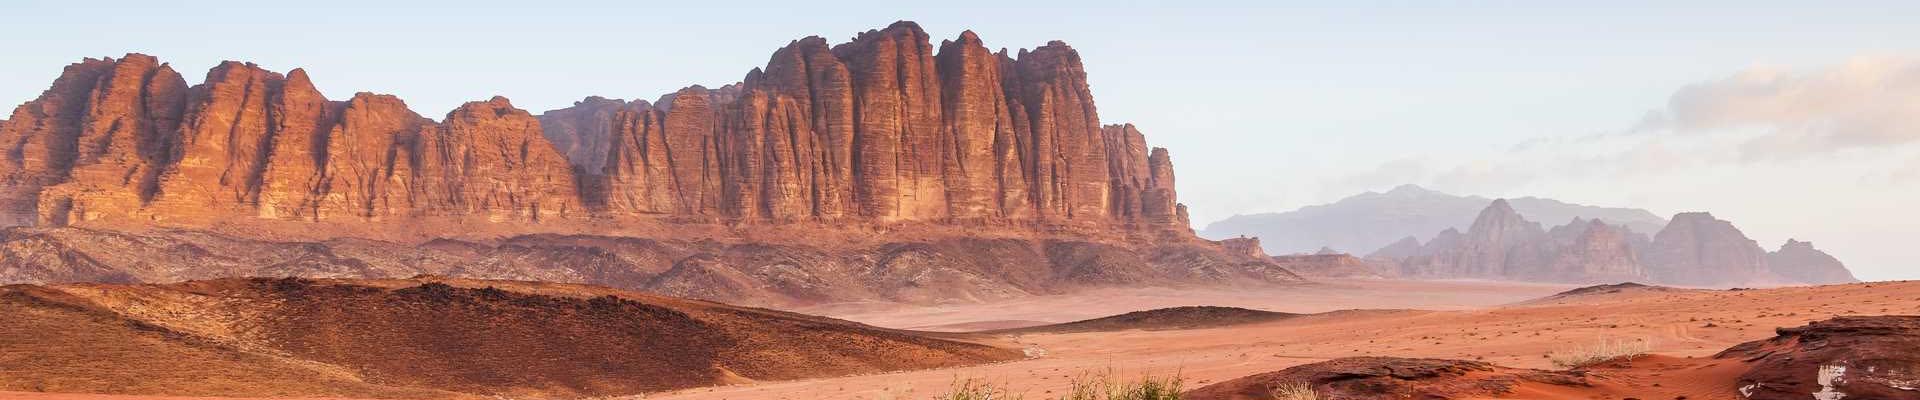 Embark on Thrilling Explorations with Adventure Tours in Jordan